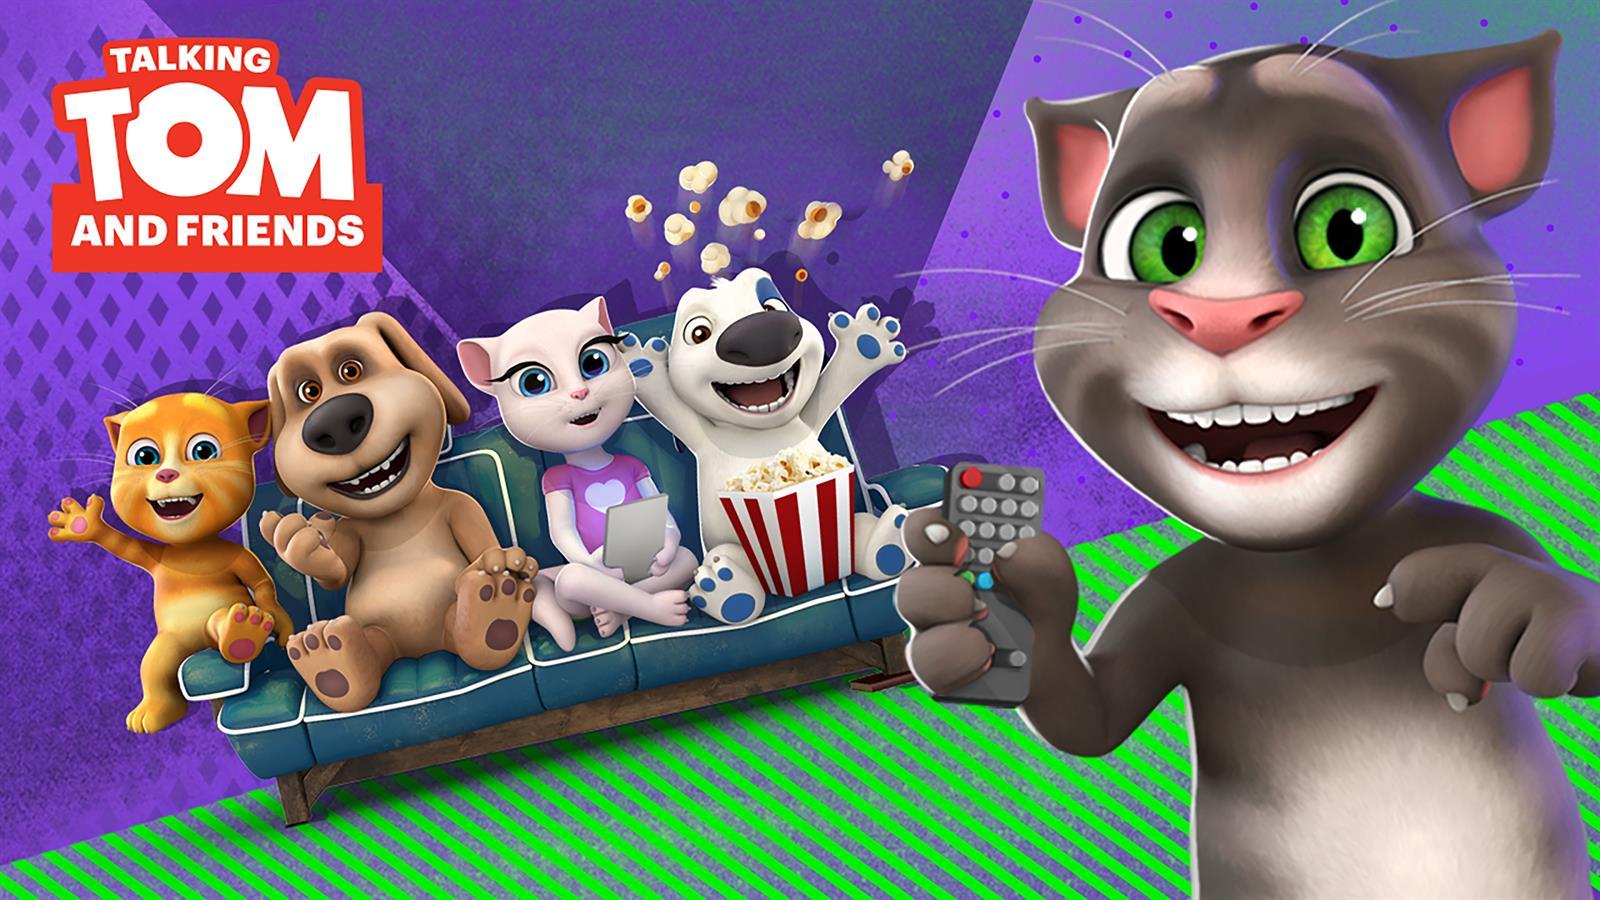 Talking Tom and Friends Wallpaper Free Talking Tom and Friends Background